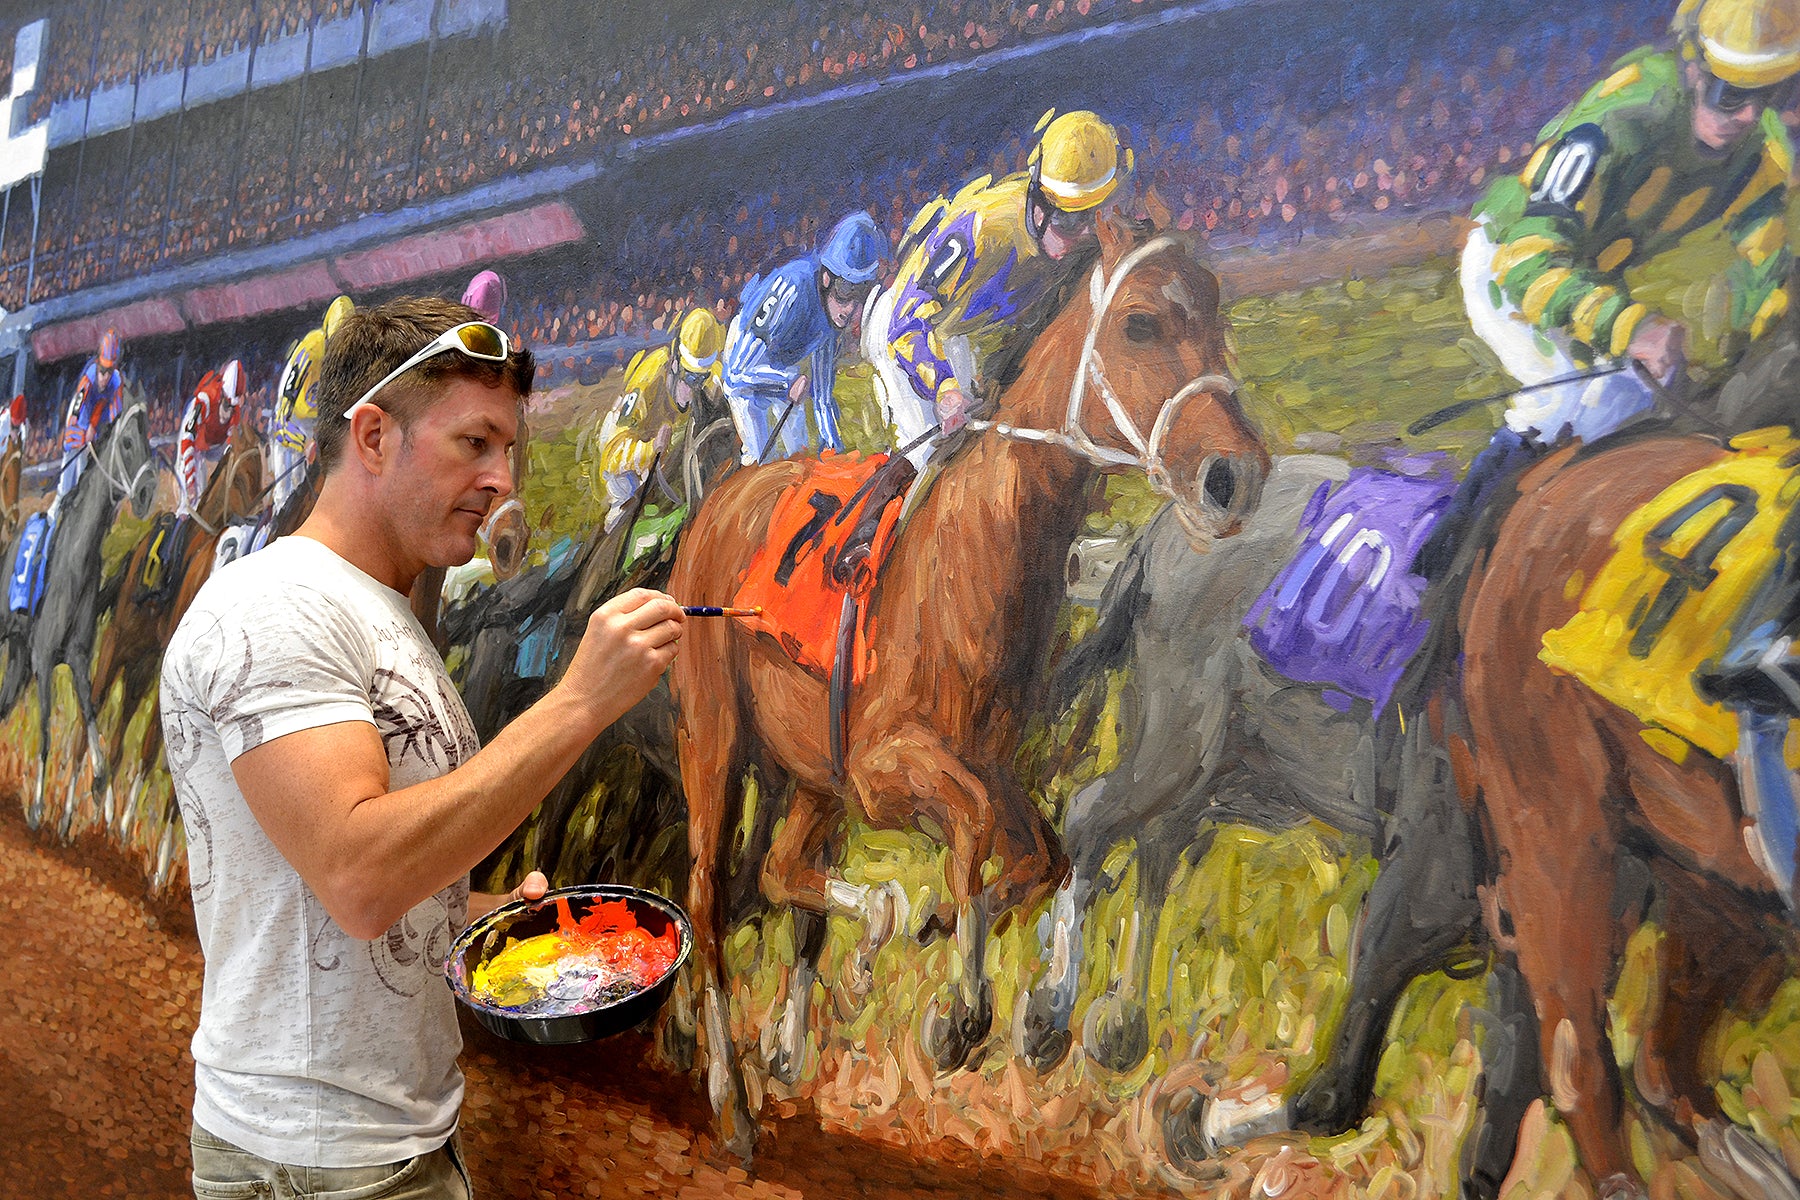 Artist Tom Myott is painting a large-scale commission piece. He is in the process of detailing a horse racing scene, with a focus on a brown horse with the number seven. Myott, in a casual white shirt and holding a palette full of vibrant colors, is painting with concentration and precision. The artwork captures the dynamic energy of the race, with jockeys in colorful silks riding their mounts, depicted in Myott’s signature expressive style.